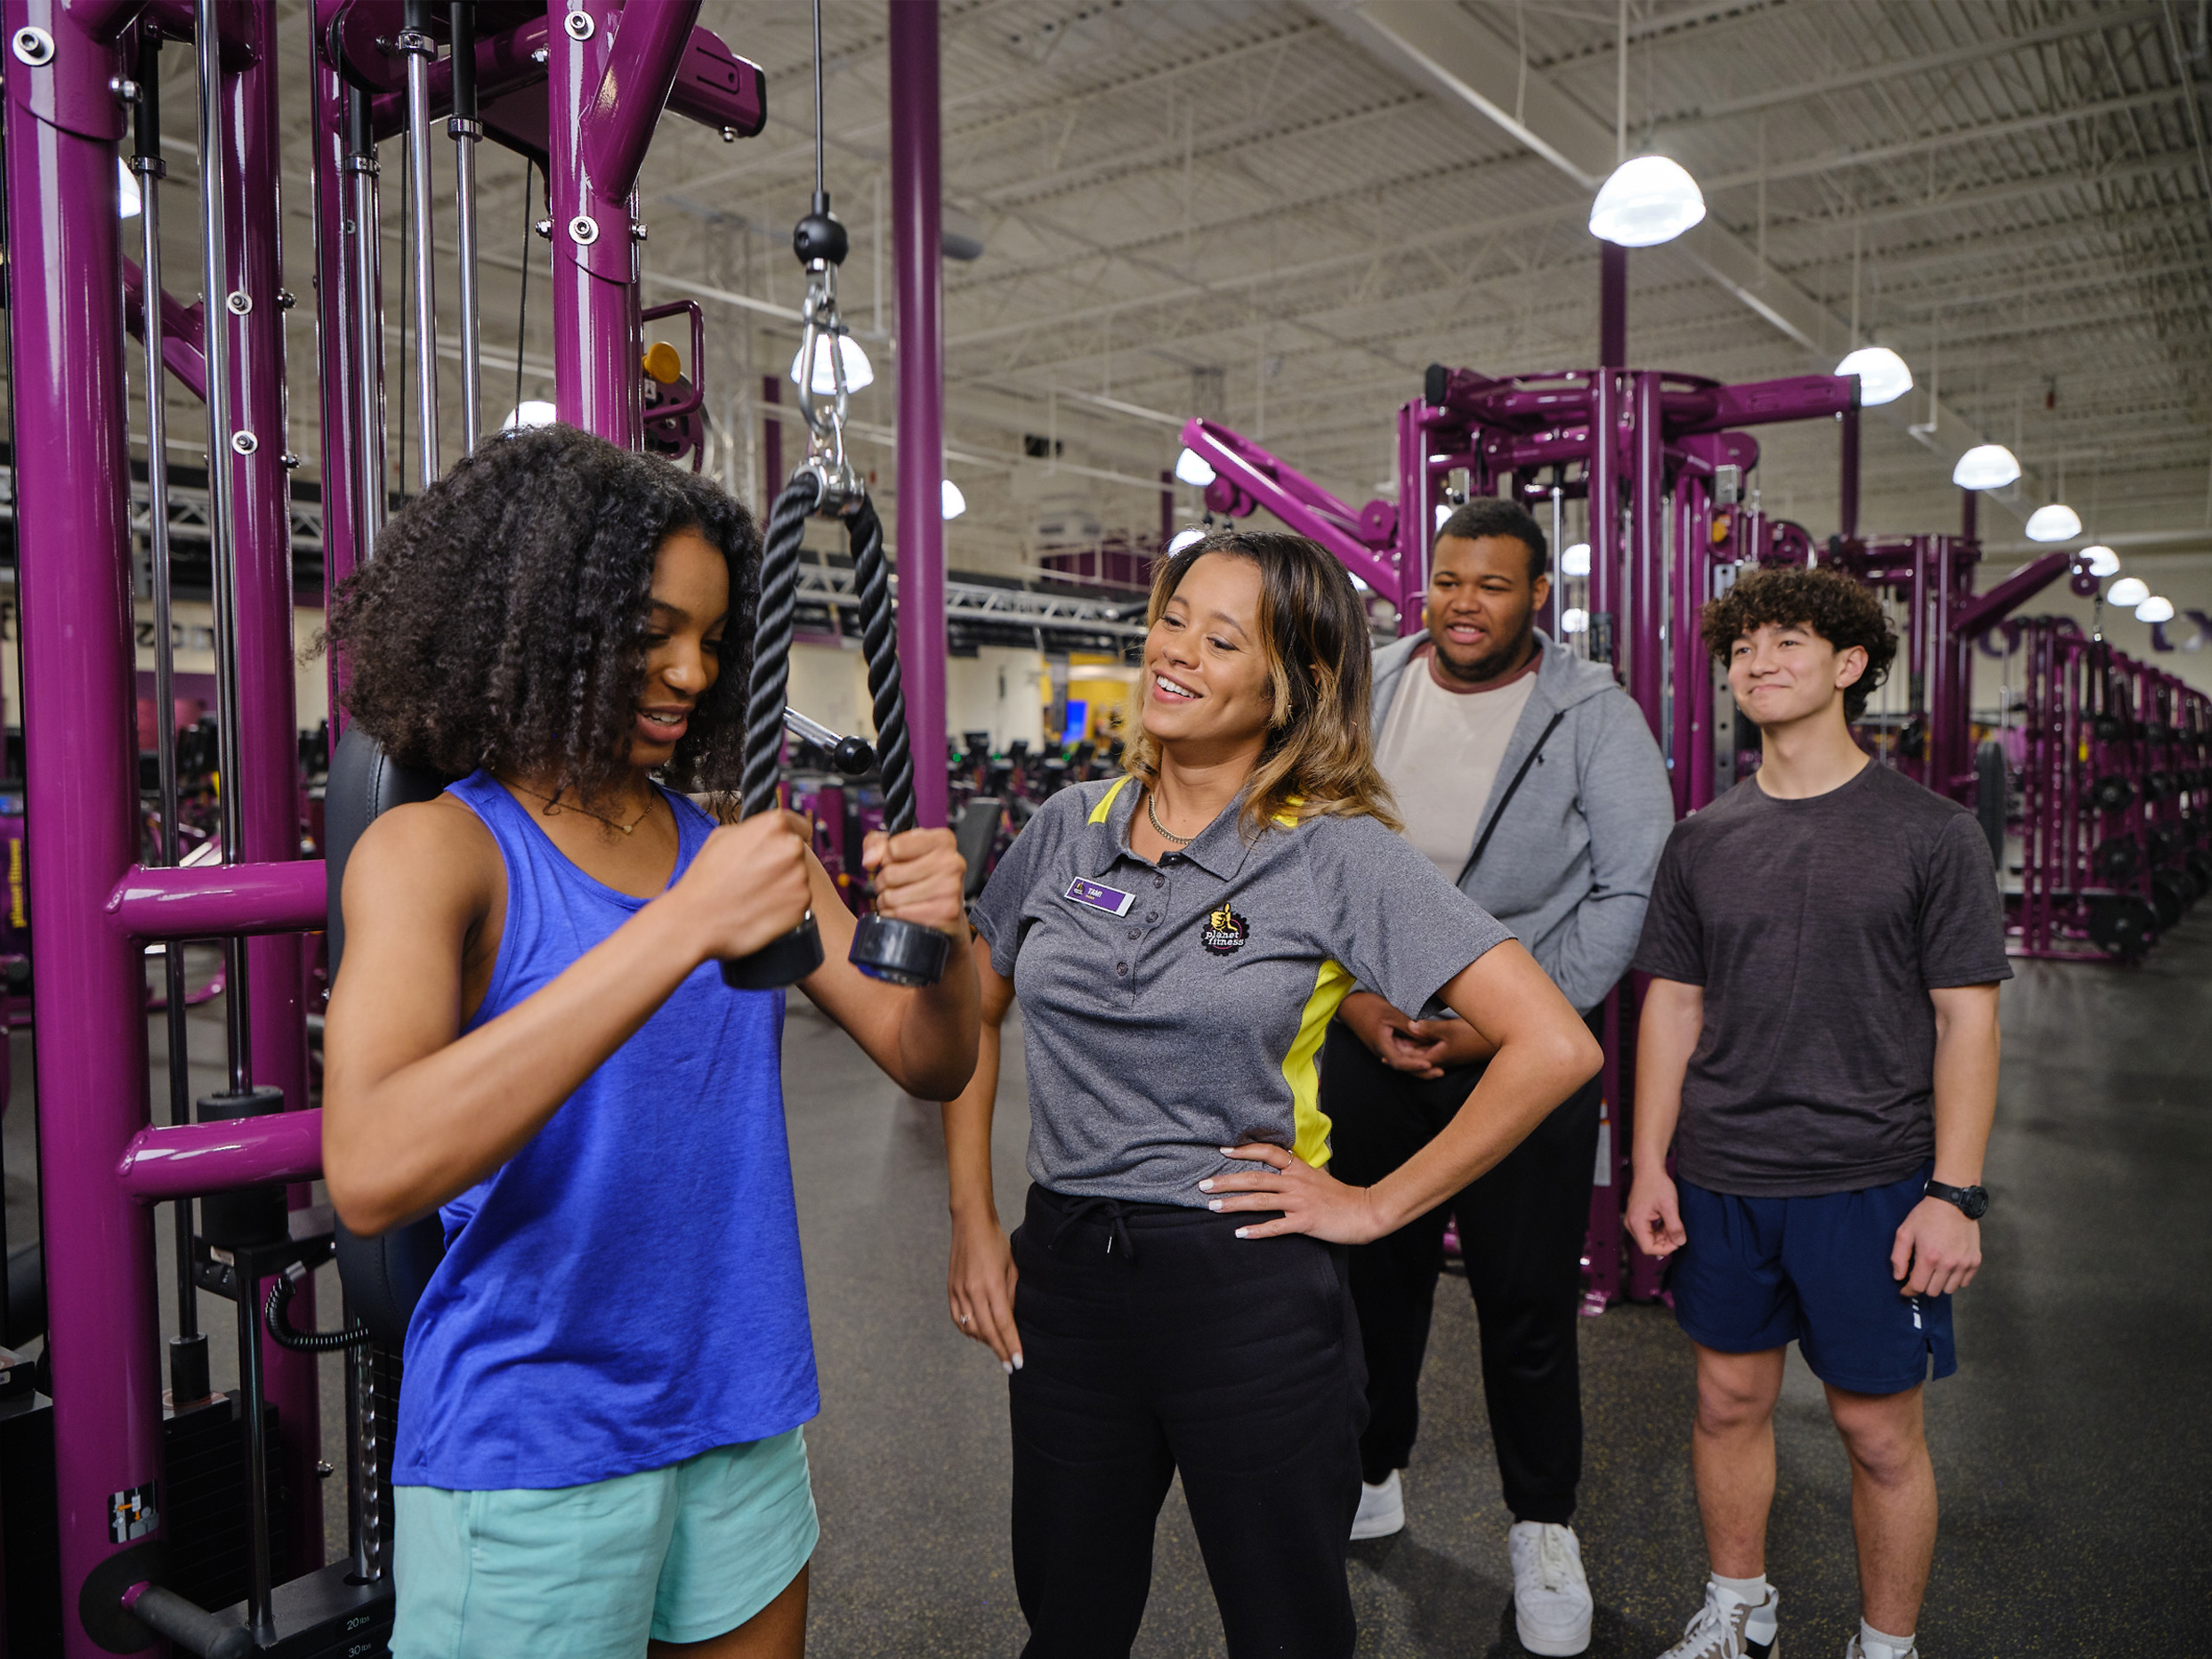 Planet Fitness Group